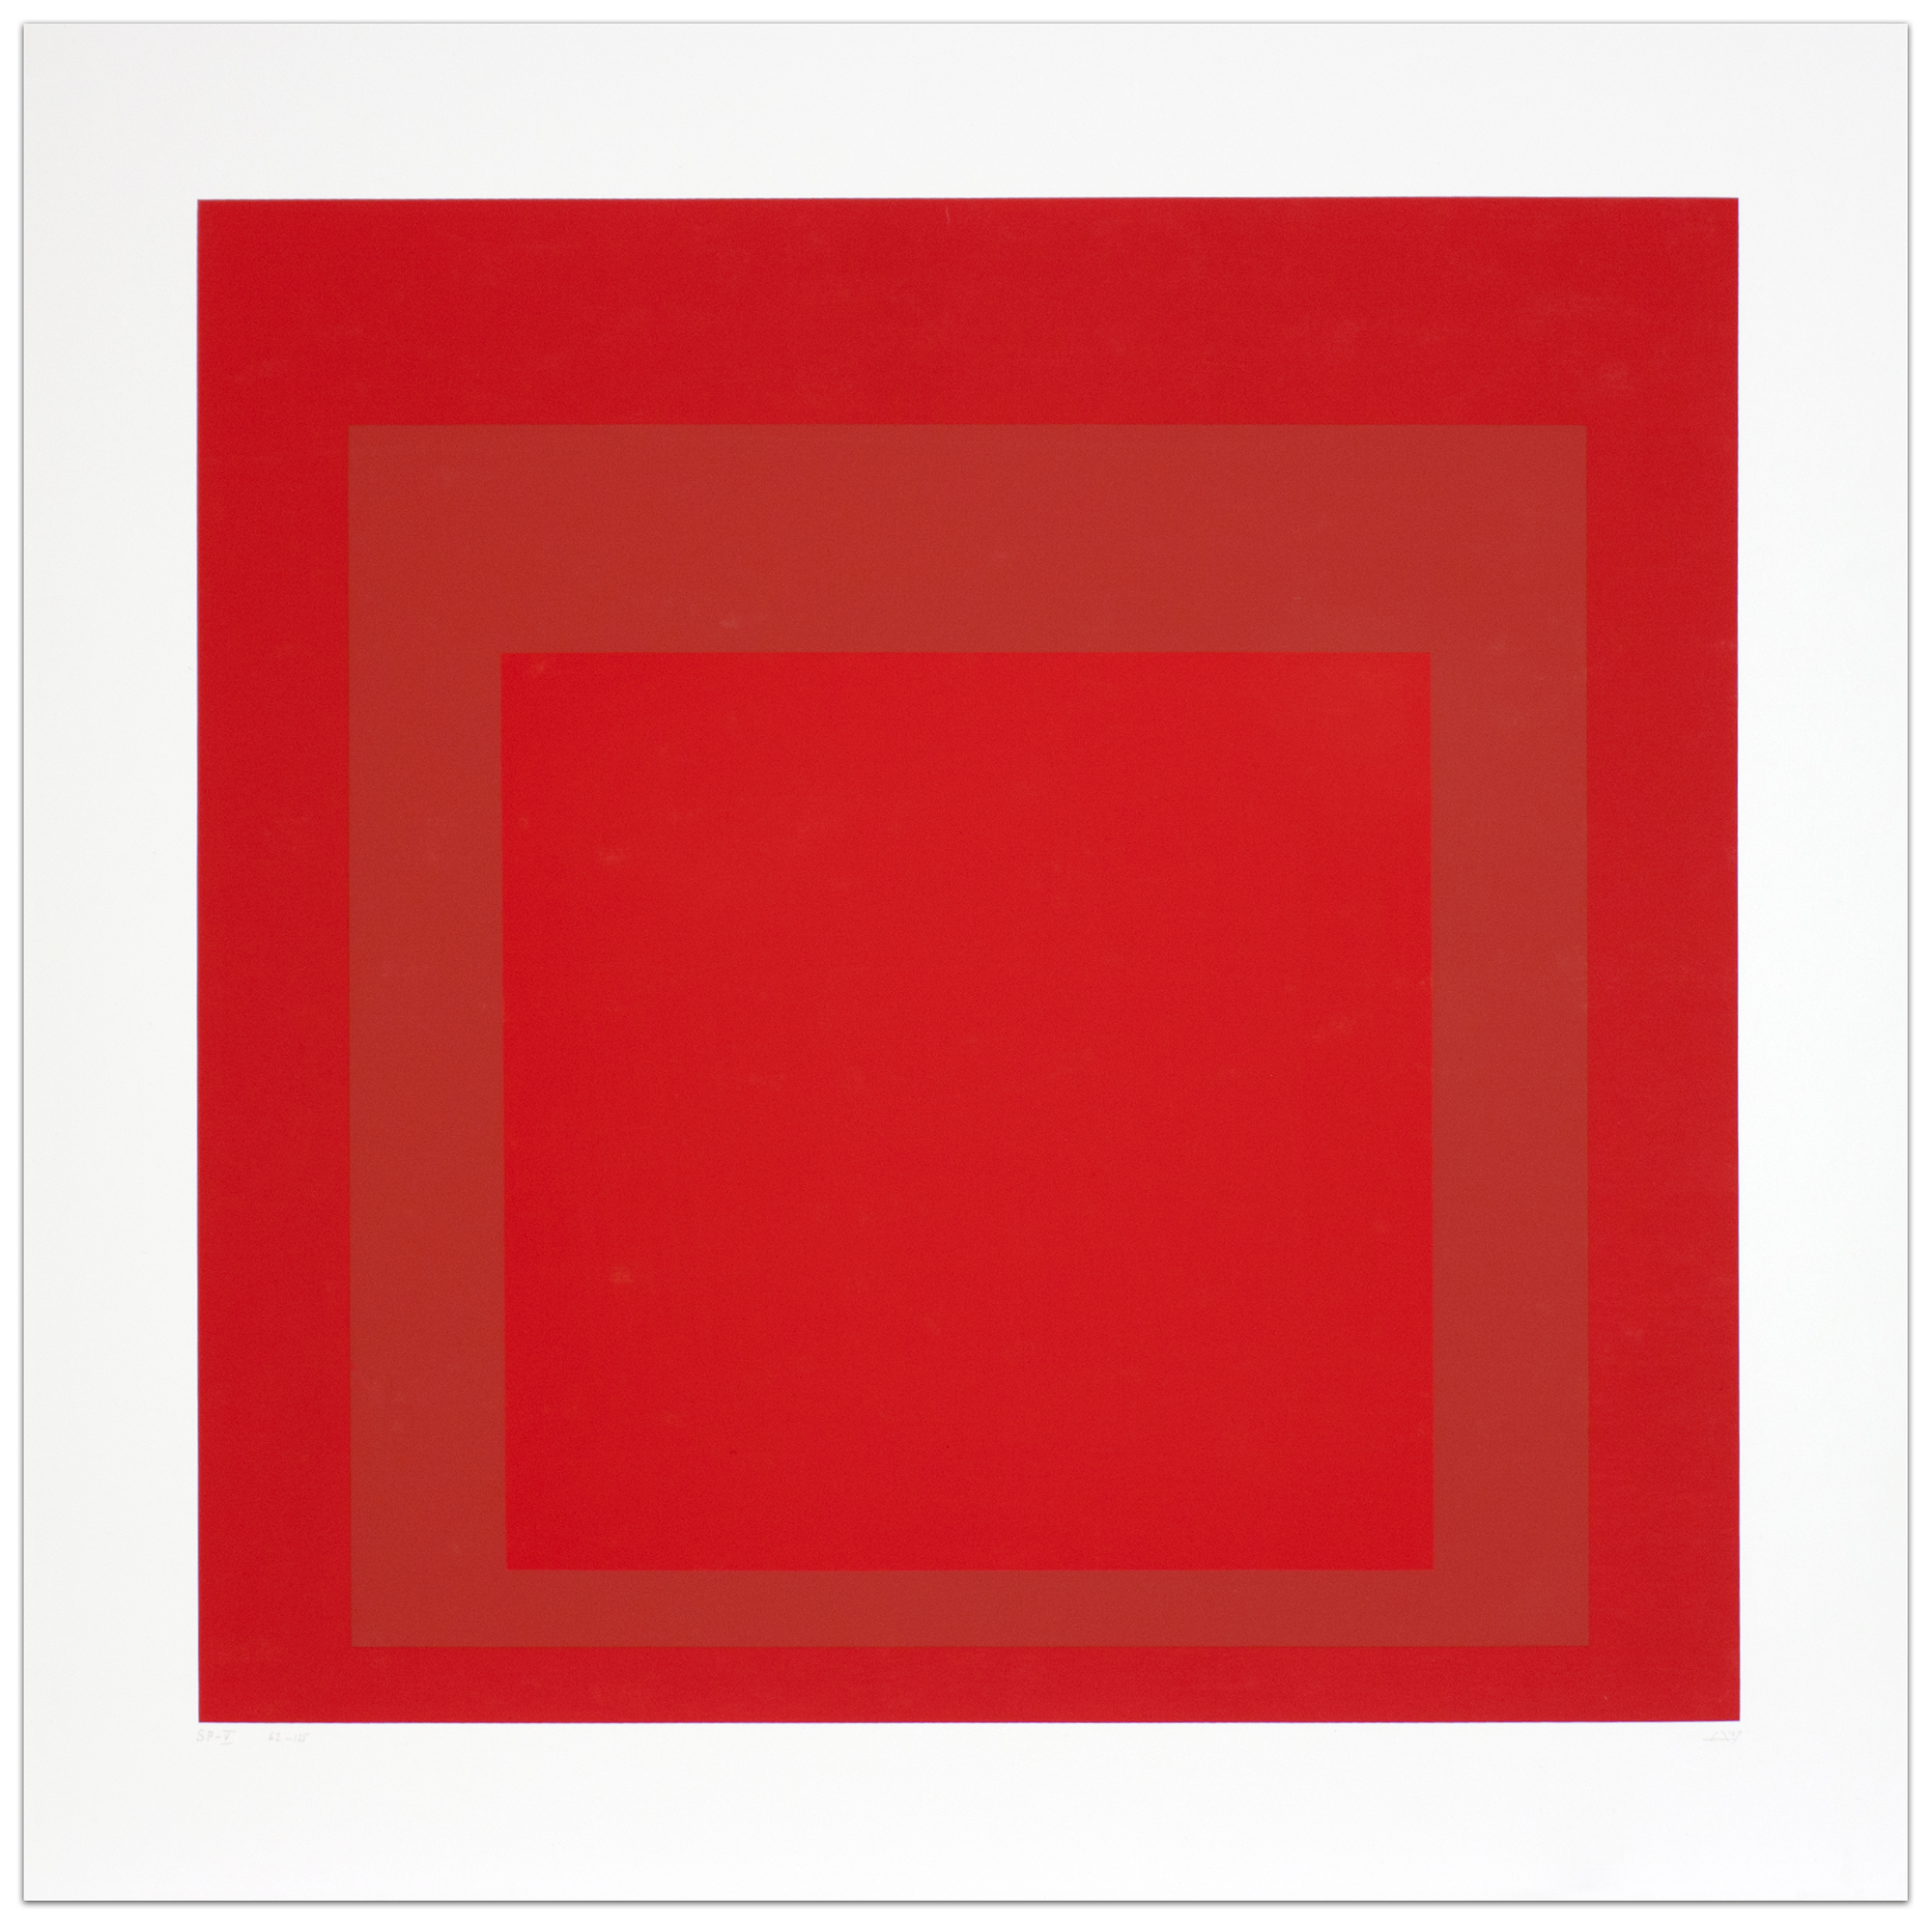 Josef Albers, Homage to the Square: With Rays